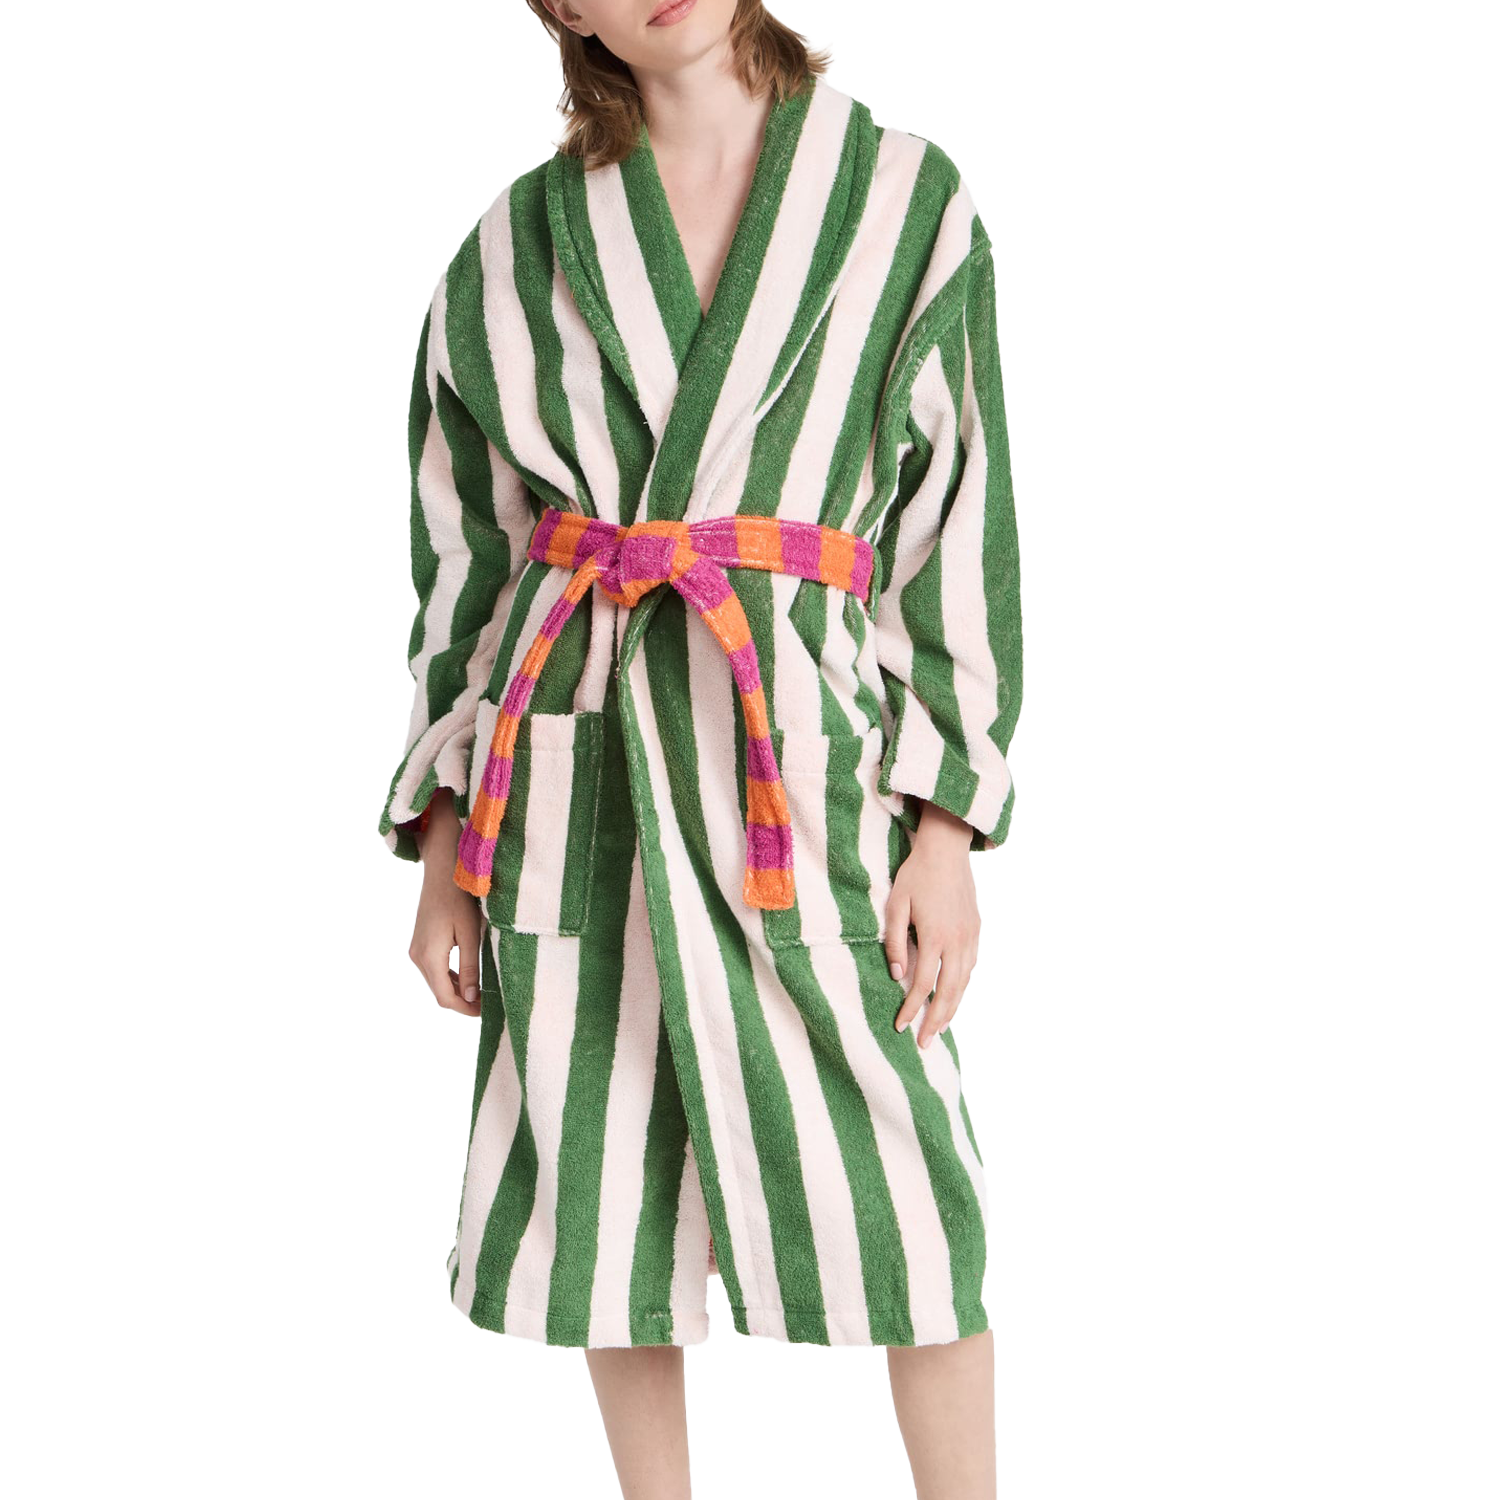 Unsurprisingly, the Stripy Robe Harry Styles Rocks Backstage Is Nearly Sold Out